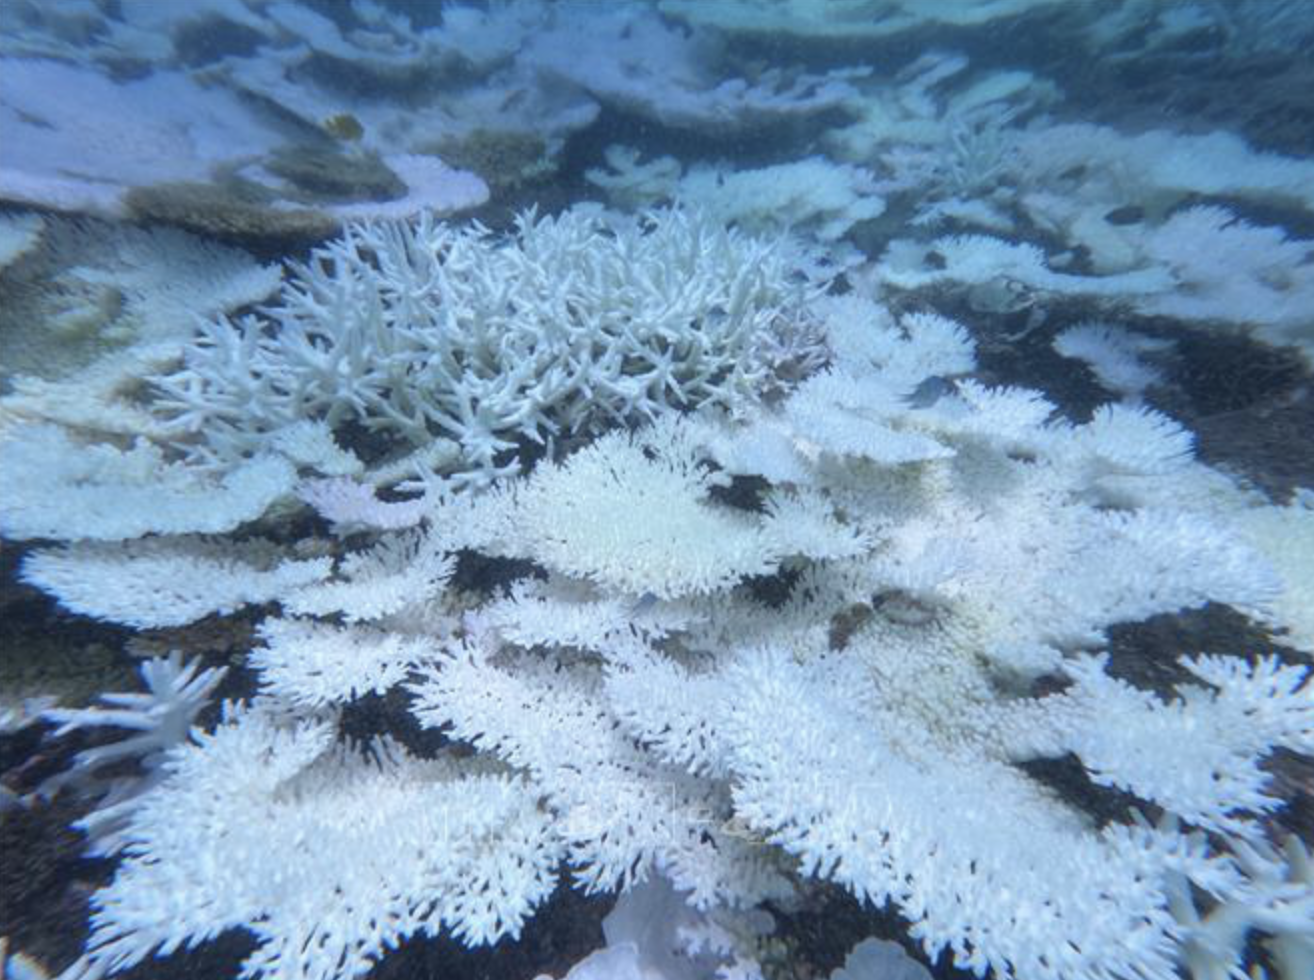 Coral bleaching on Con Dao Archipelago, Ba Ria - Vung Tau Province, southern Vietnam results from high ocean temperatures. Photo: Vietnam News Agency